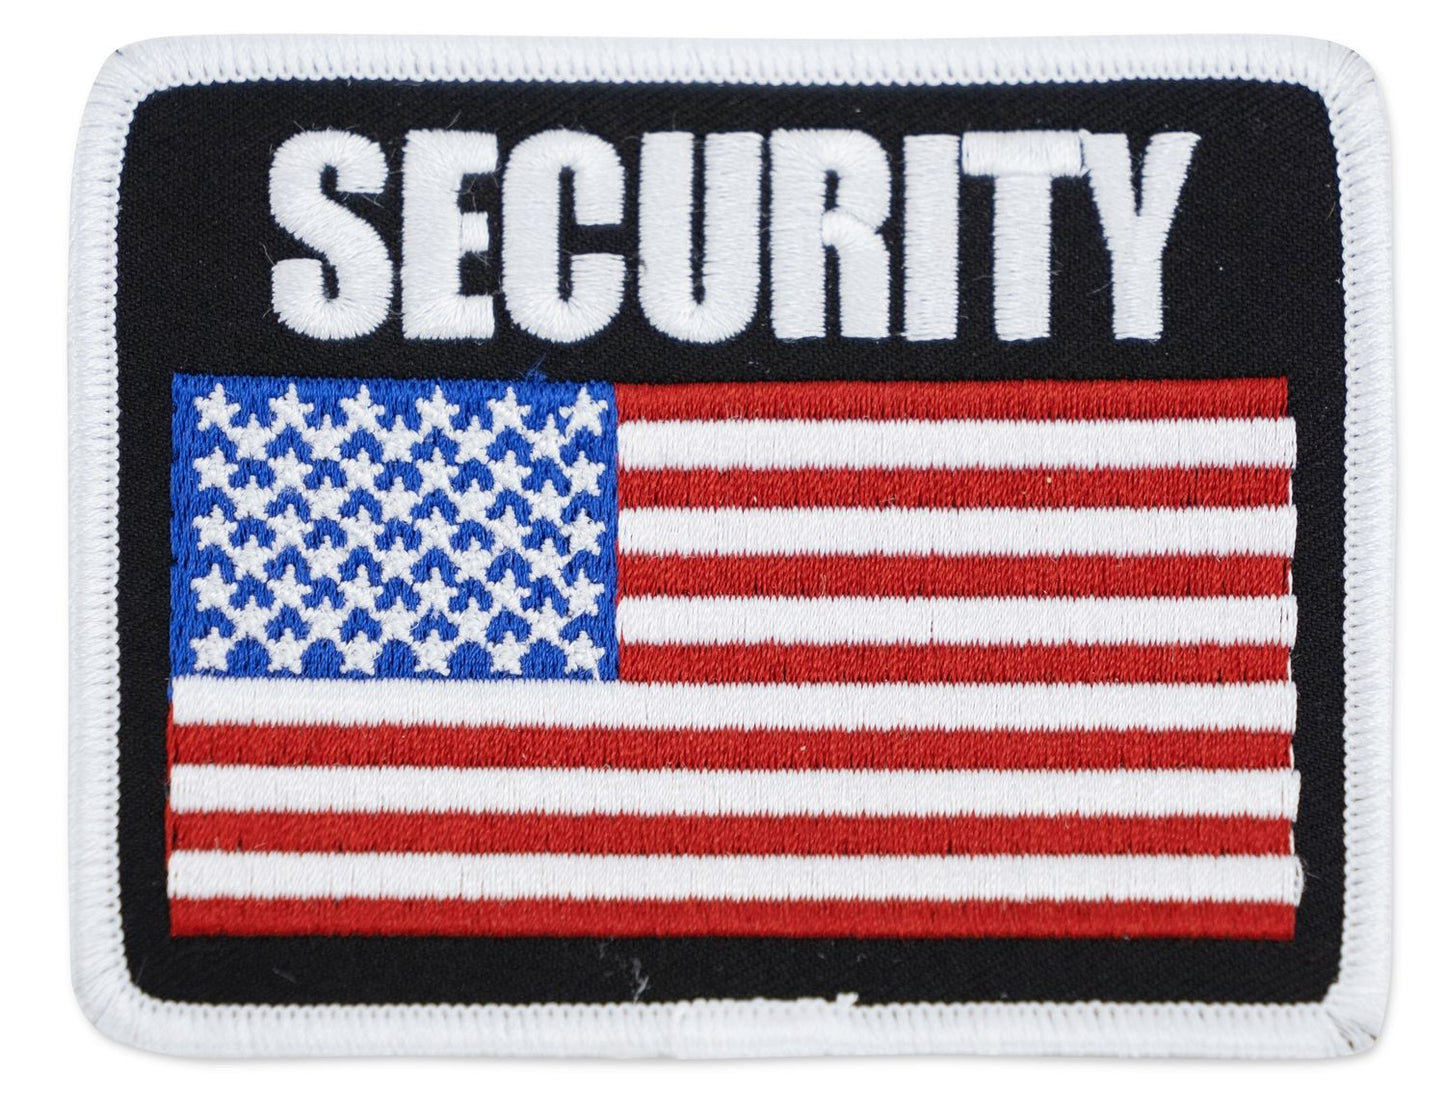 SECURITY AMERICAN FLAG PATCH - LEFT SIDE